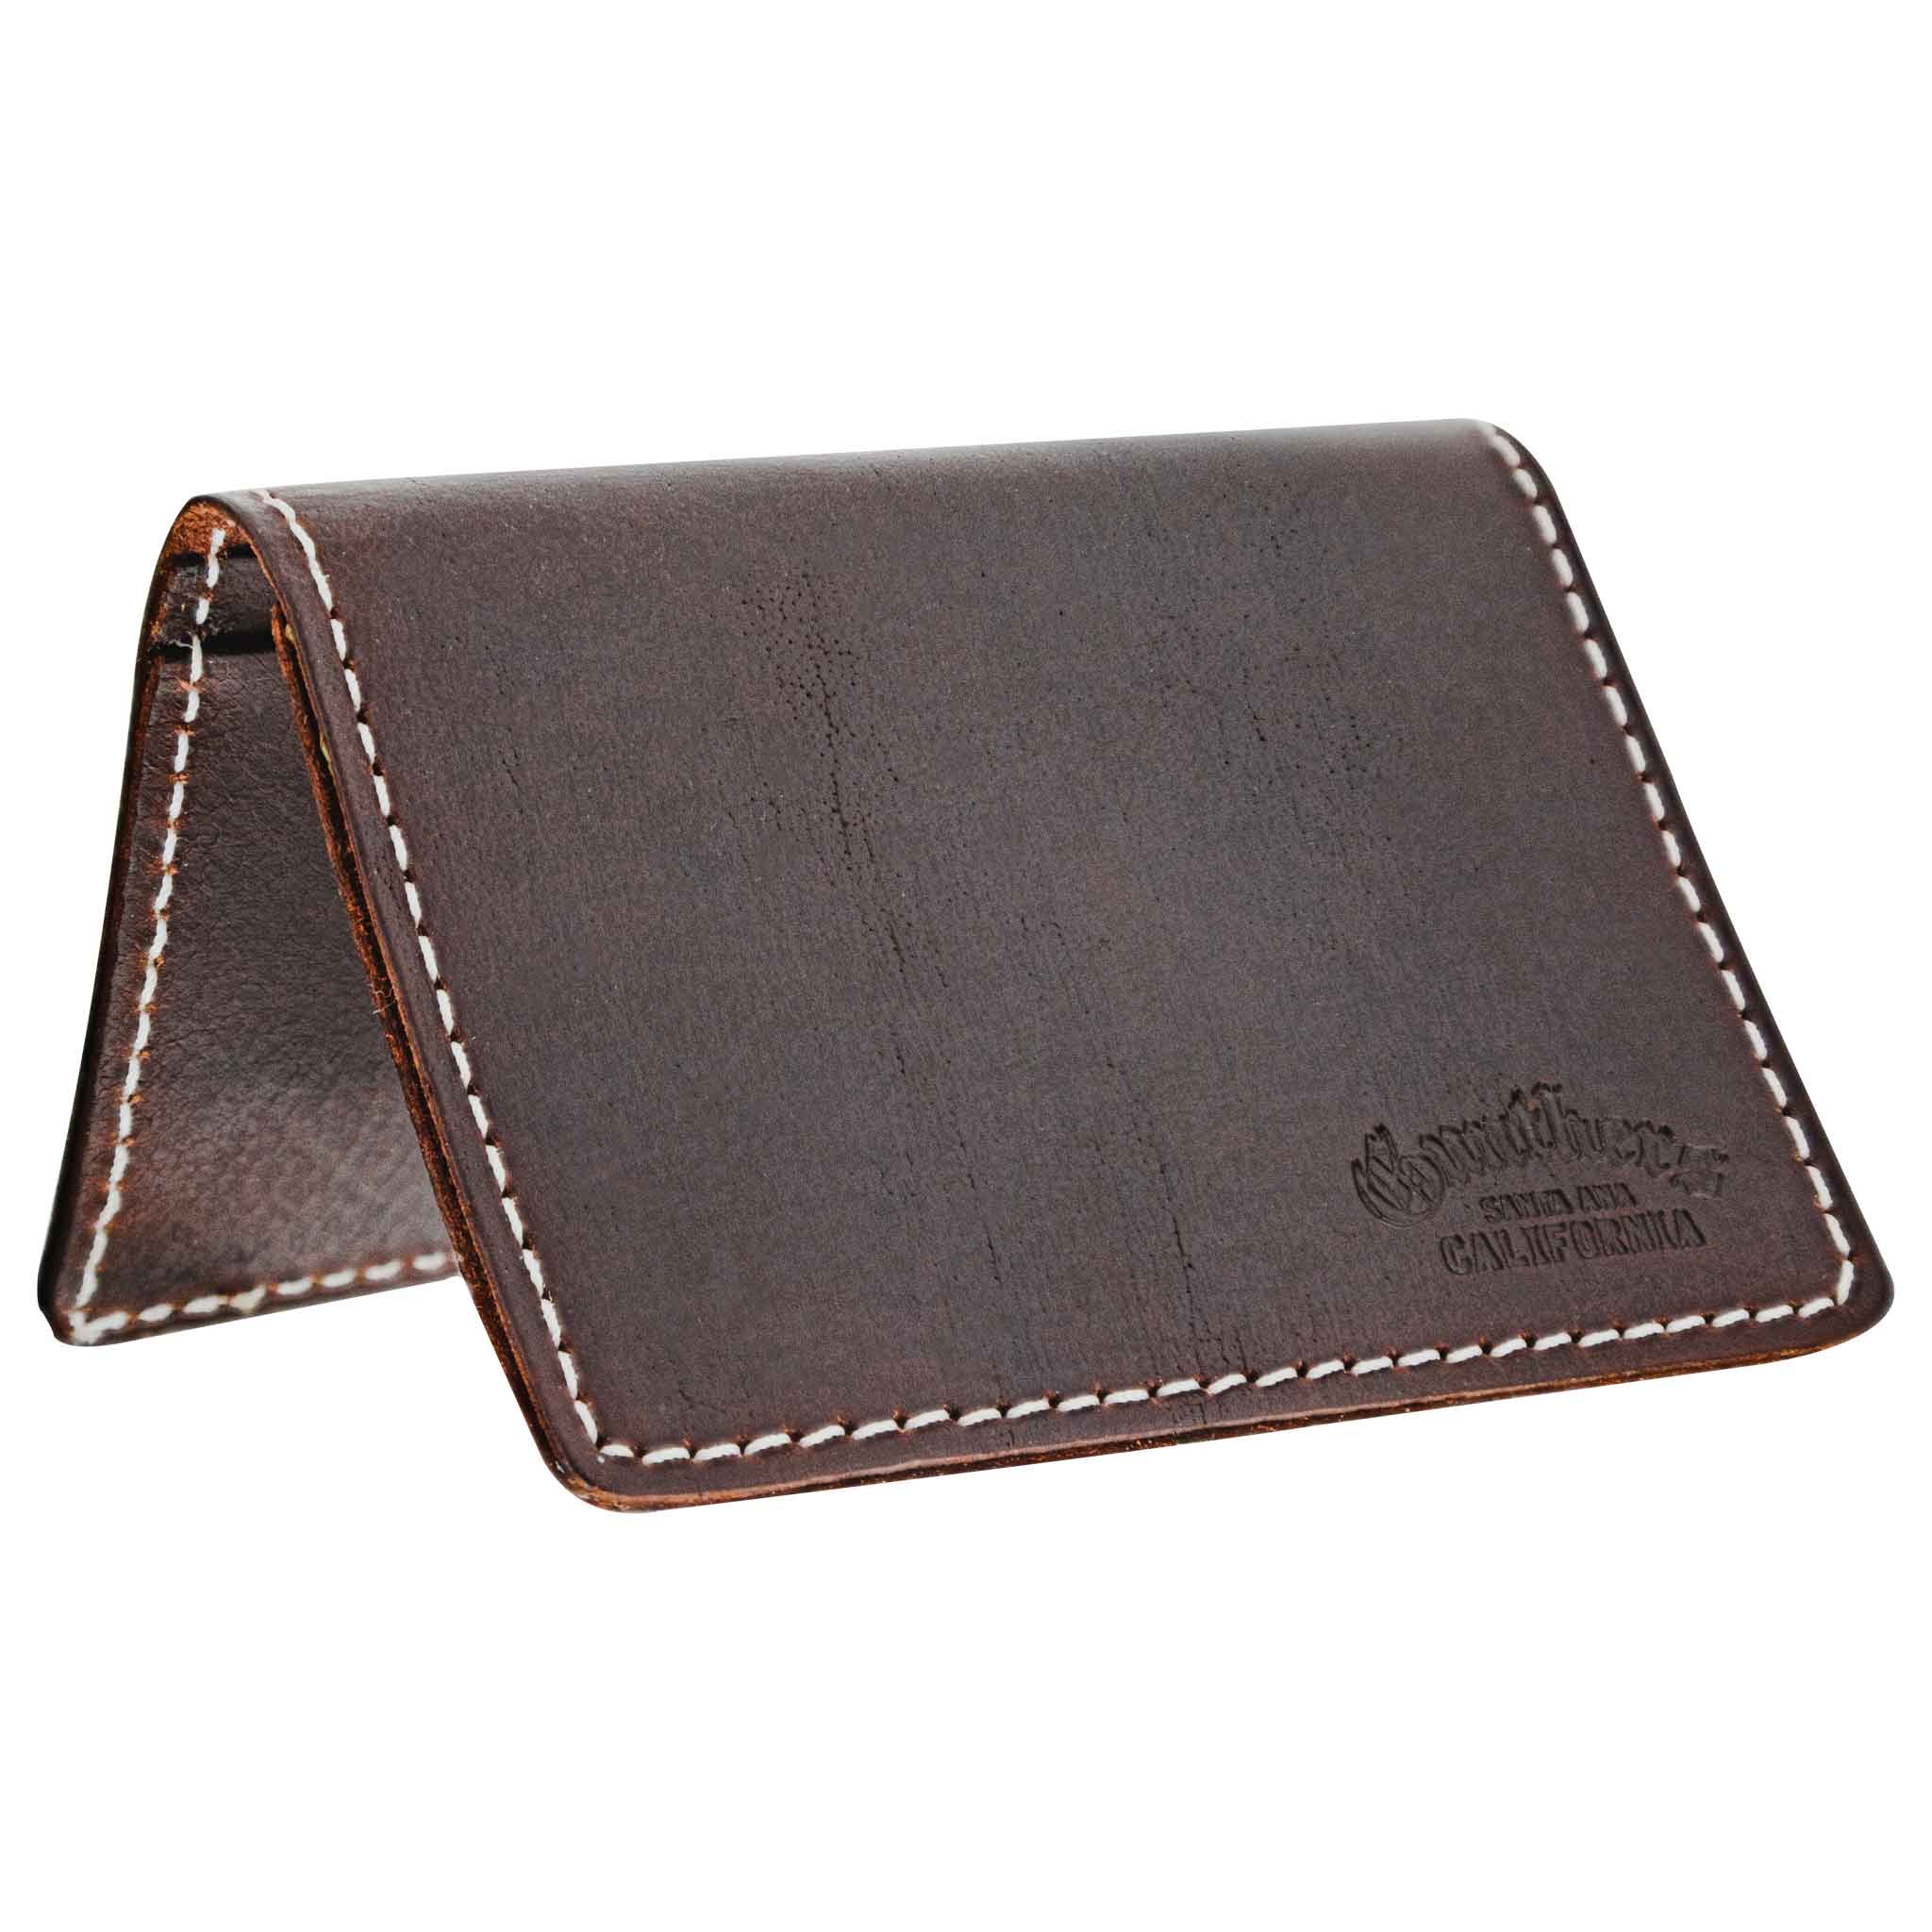 Card Holder Wallet Chocolate